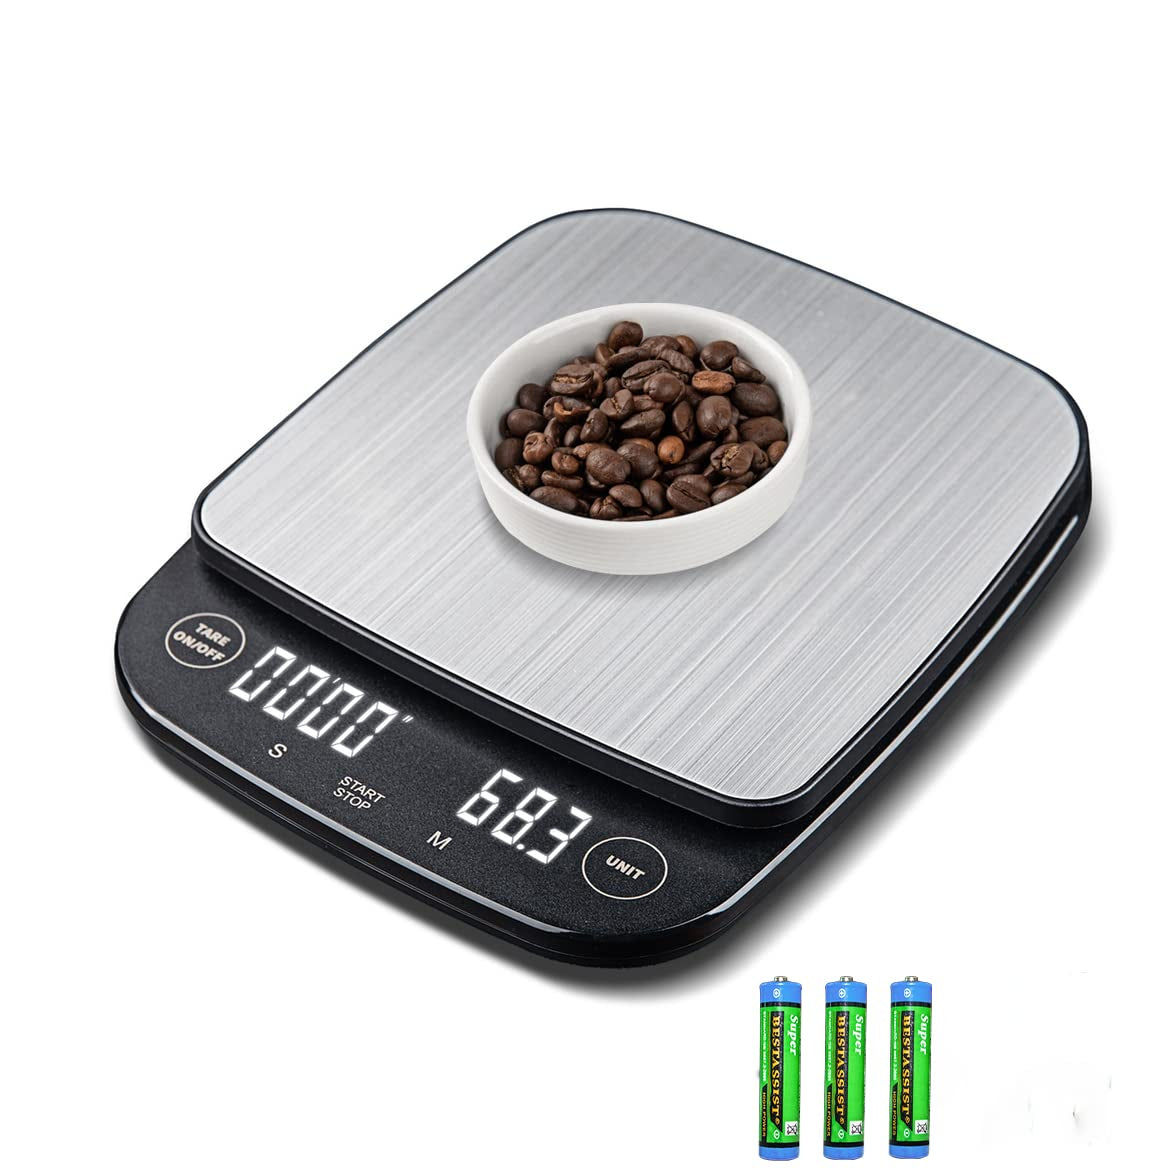 Digital Kitchen Scale for Food Ounces and Grams, Gram Scale for Cooking, Baking, 3kg/0.1g Super Accurate, with Timer, Hidden LCD, Tare Function, Easy to Clean and Store (Black)